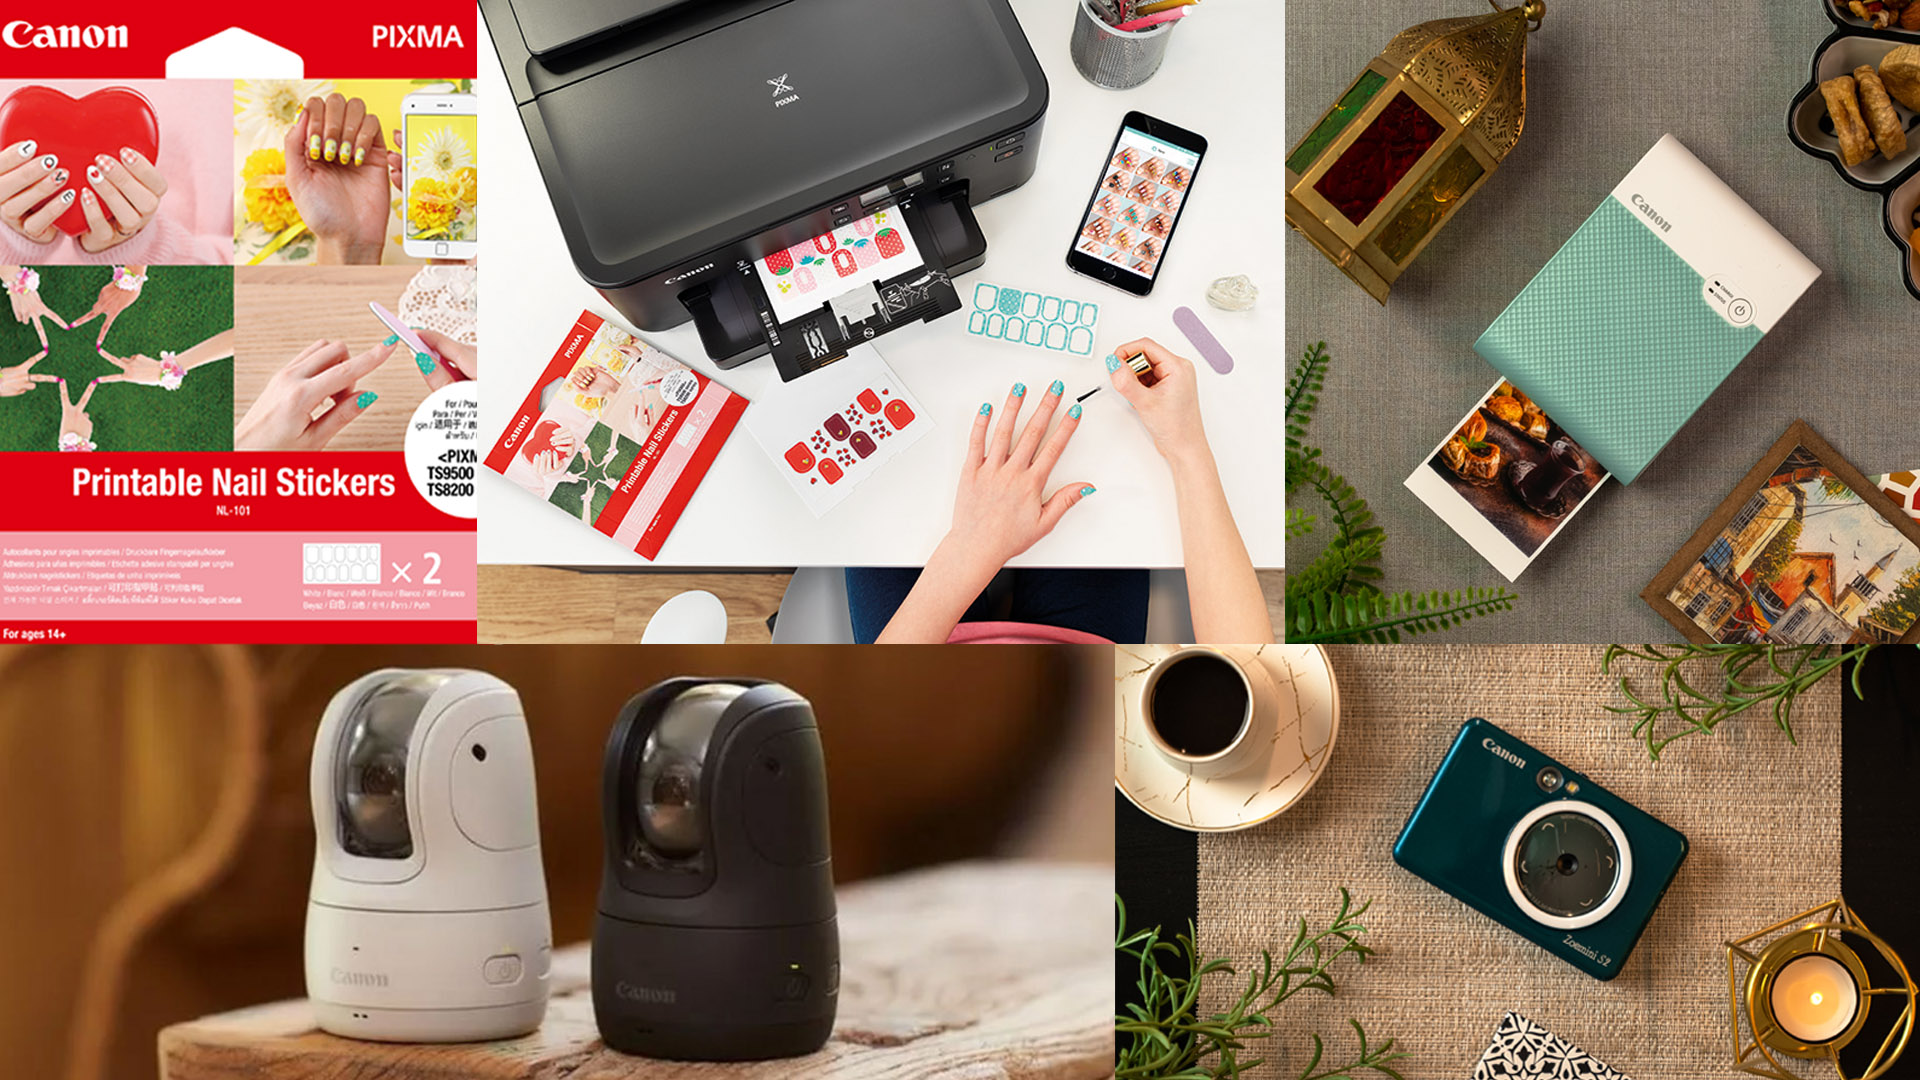 Canon shares Its Top 5 Gifting Ideas for Eid 